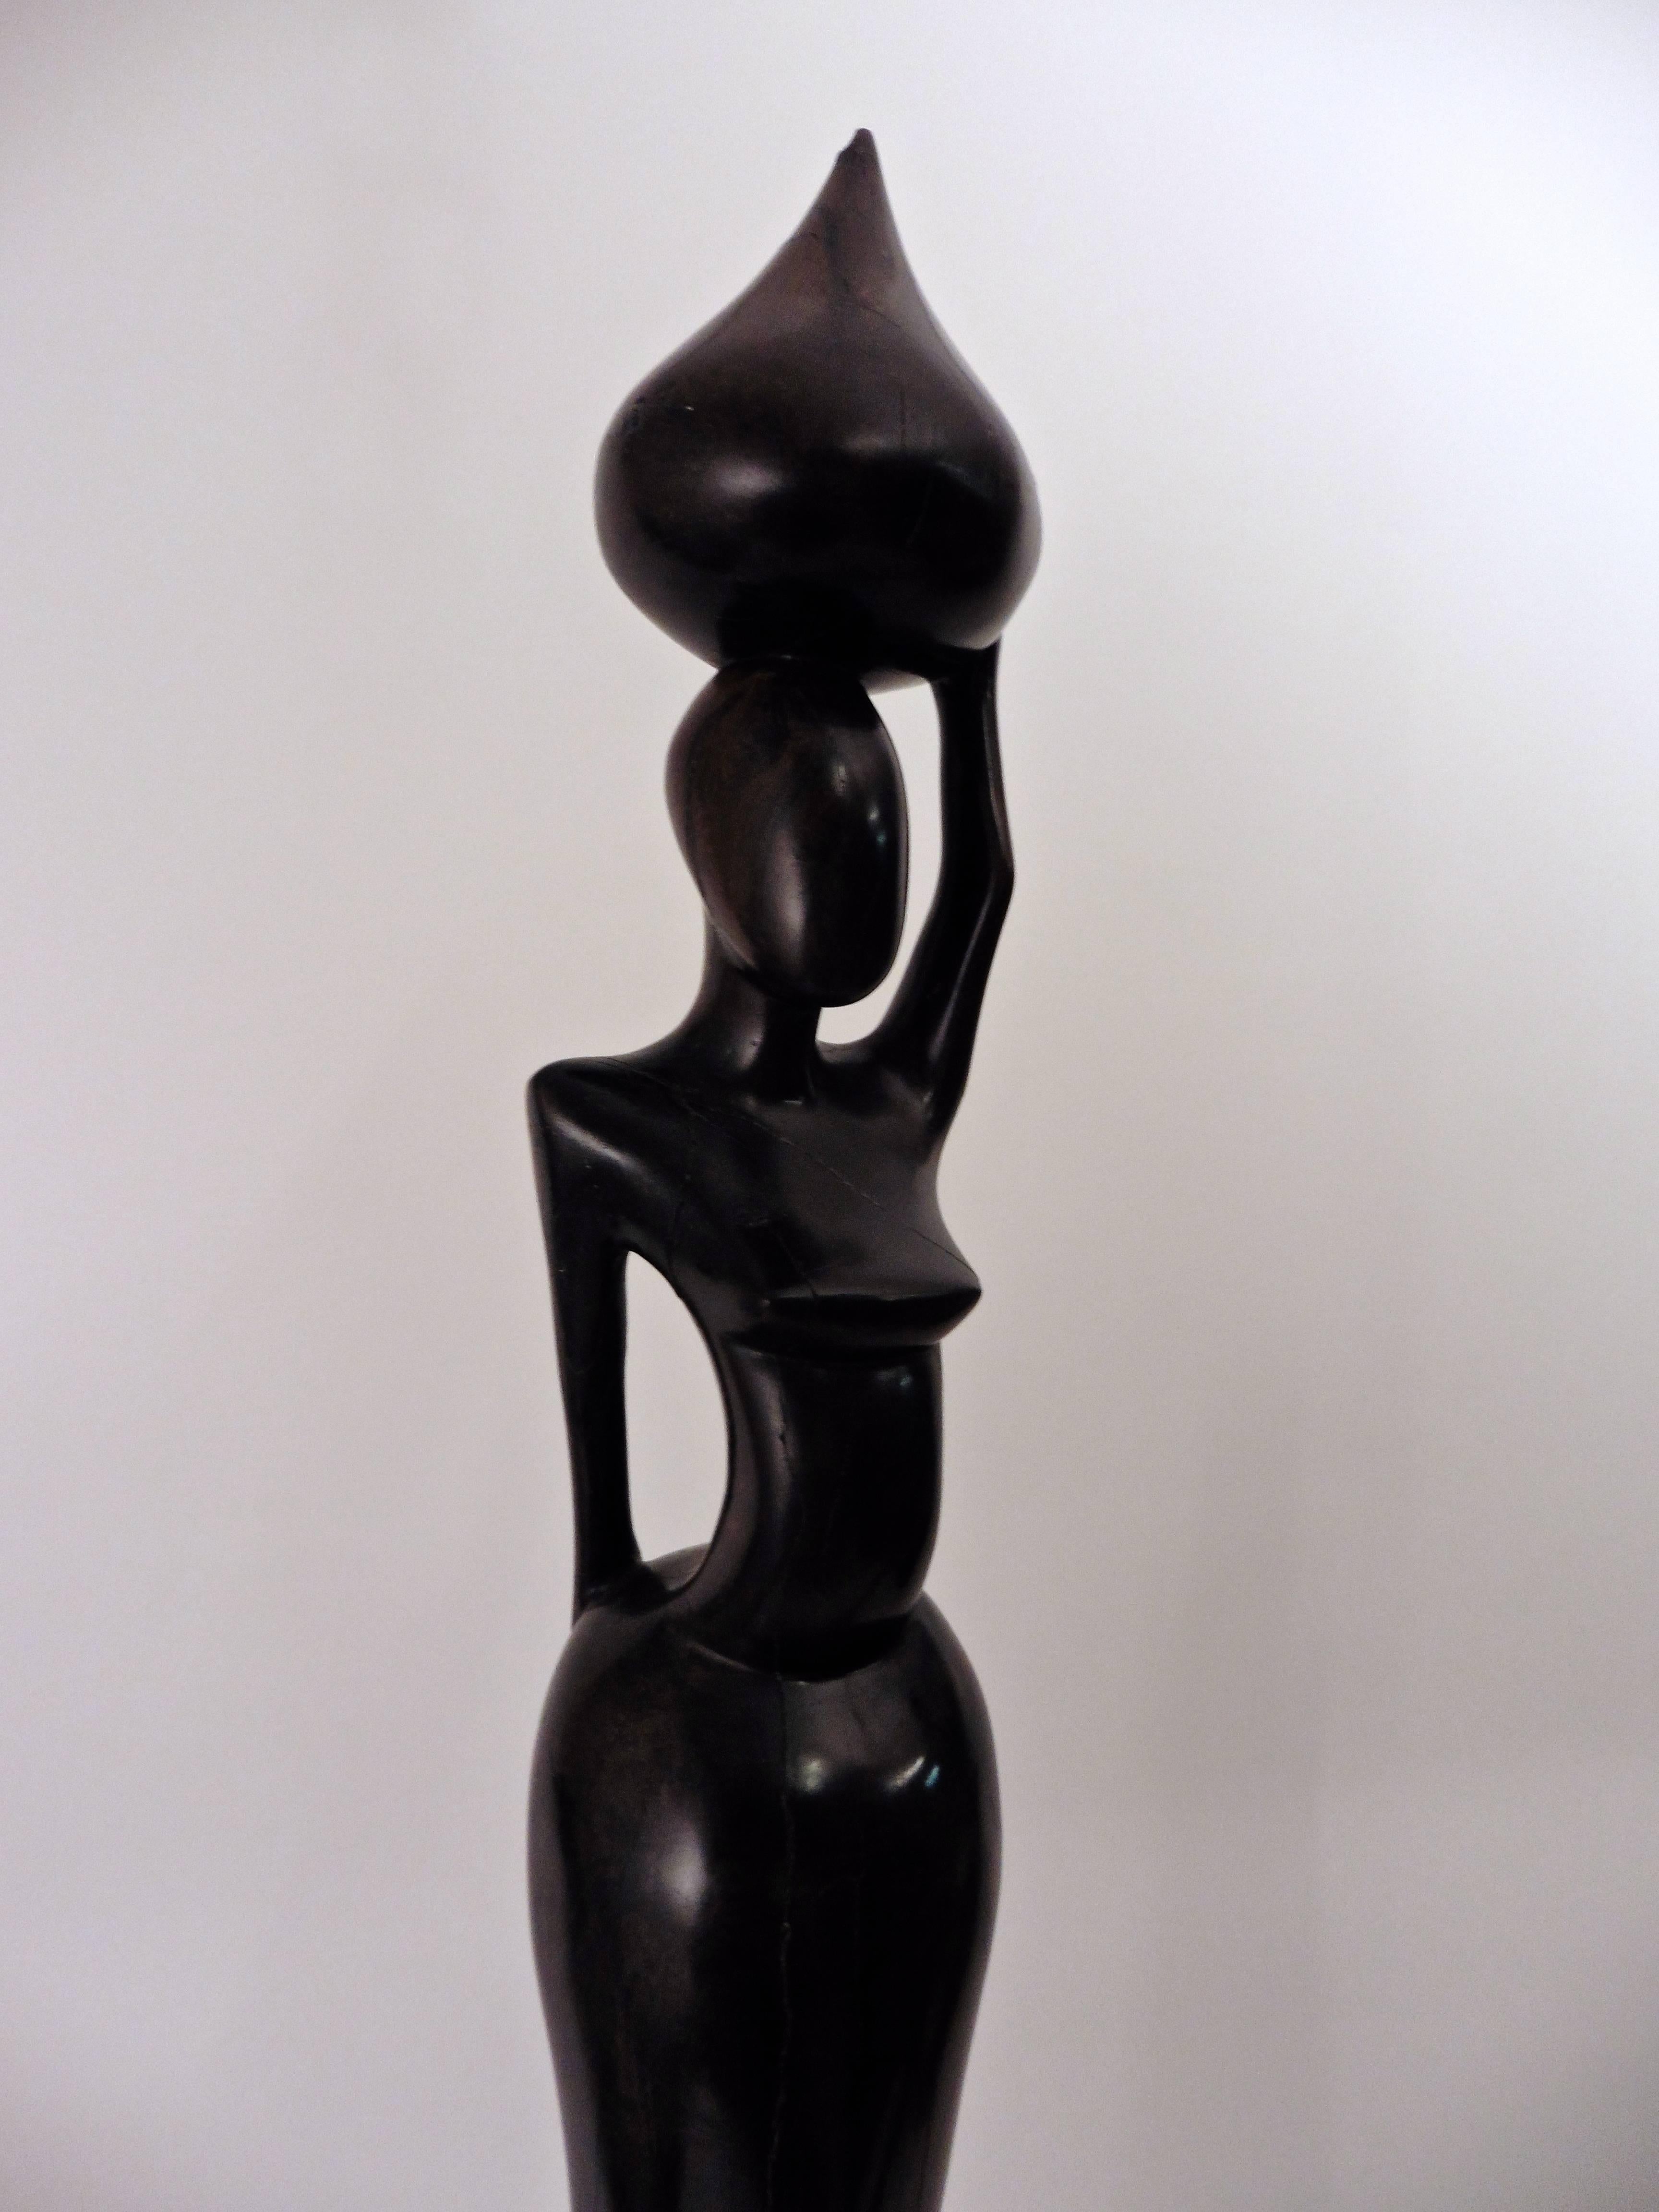 Pair of tribal male and female East African hardwood stylised sculptures in the spirit of Giacometti, circa 1960. The elongated figures elegantly sculpted from singe pieces of hardwood.

Size without stand: Small - 90cm high x 12cm diameter /big -